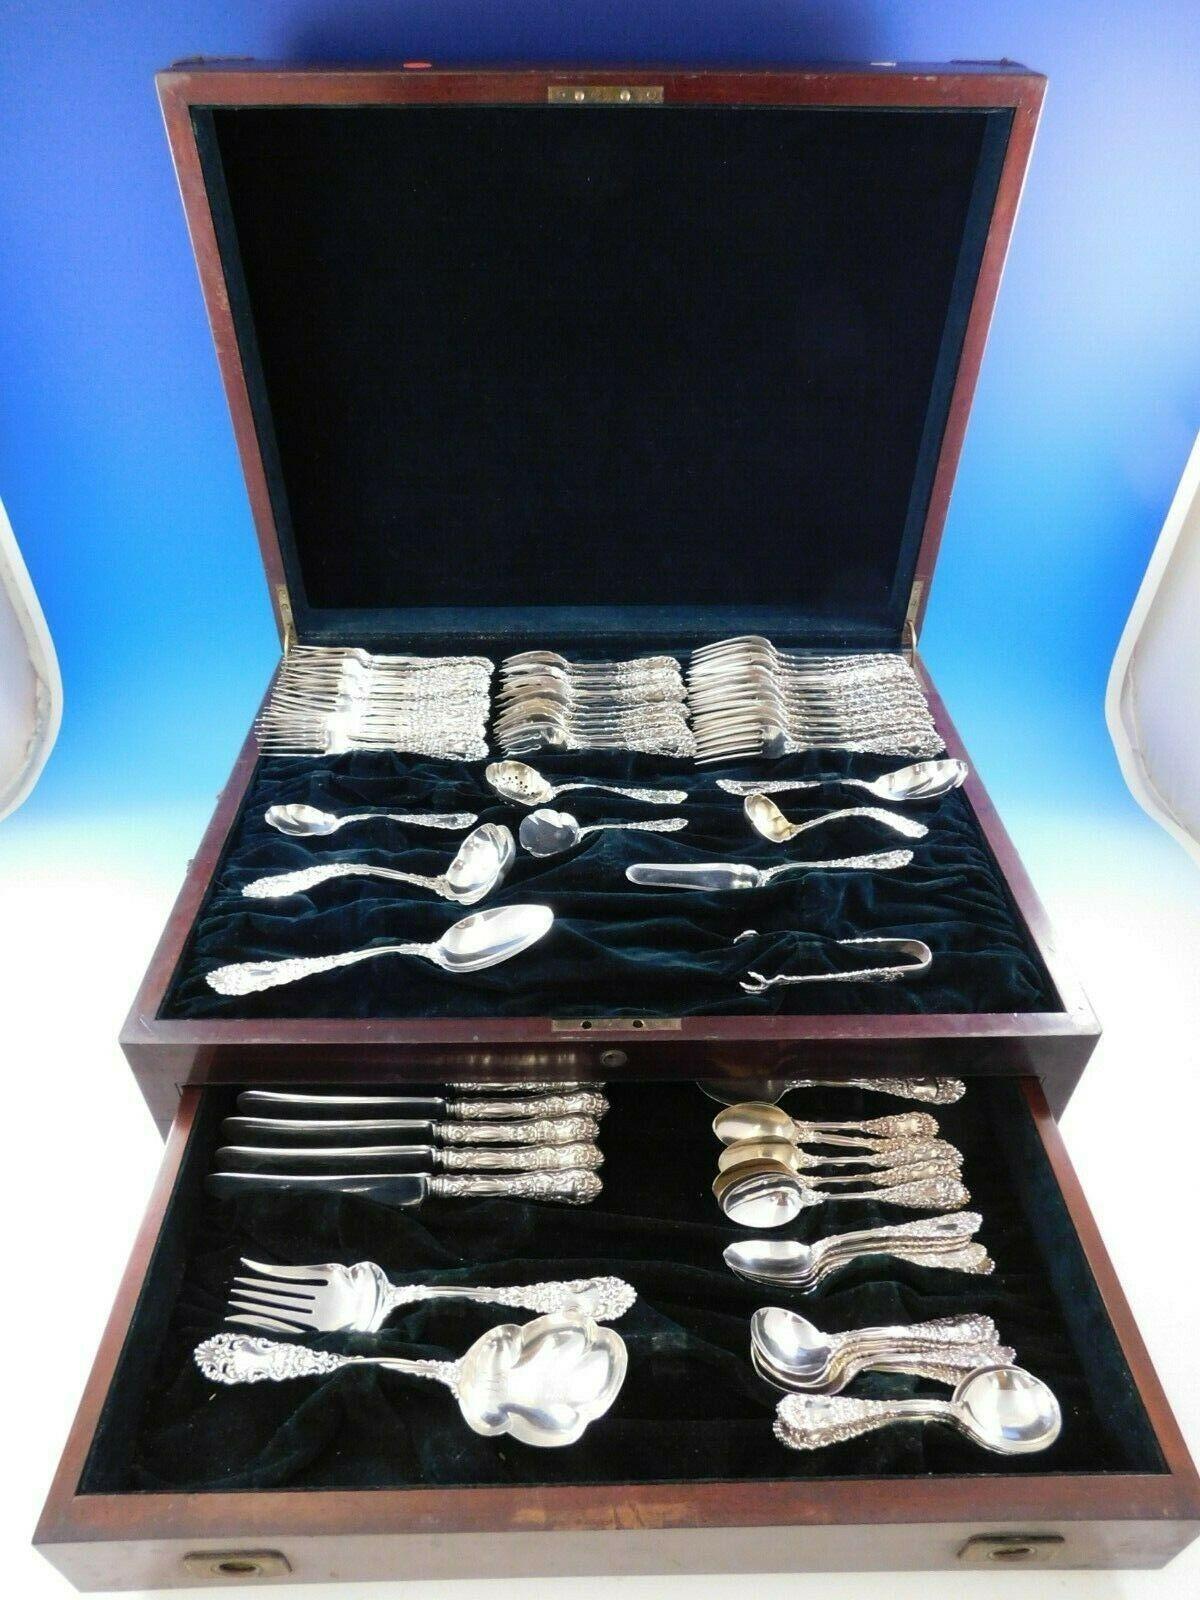 Beautiful Renaissance by Dominick and Haff flatware set, 95 pieces. This scarce figural pattern features a Renaissance Man's face on the handle and on the back of the soon bowl - in fine detail. This set includes:

12 dinner knives 9 1/4